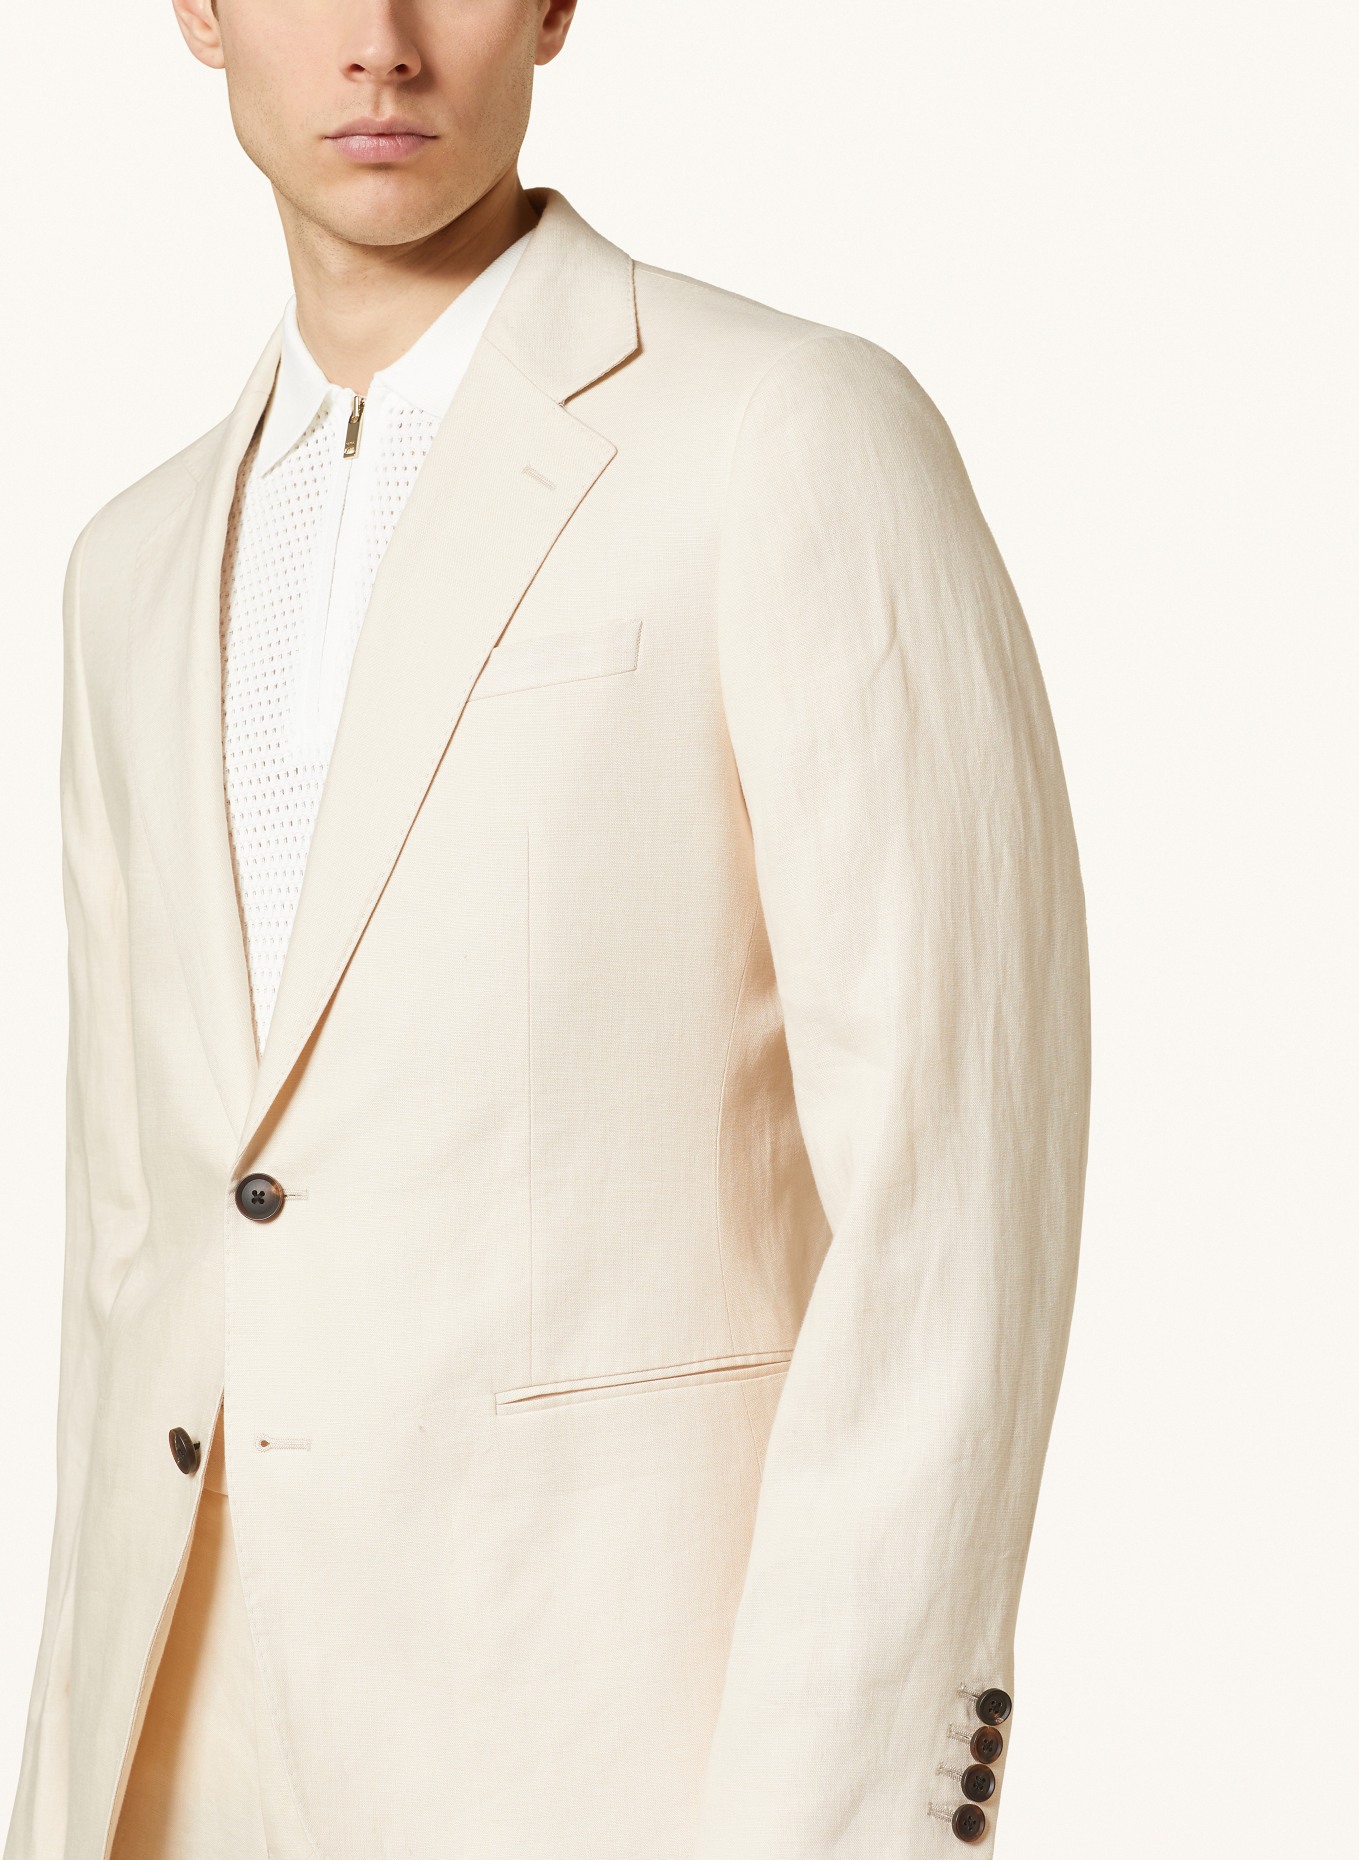 REISS Suit jacket KIN slim fit made of linen, Color: 04 STONE (Image 5)